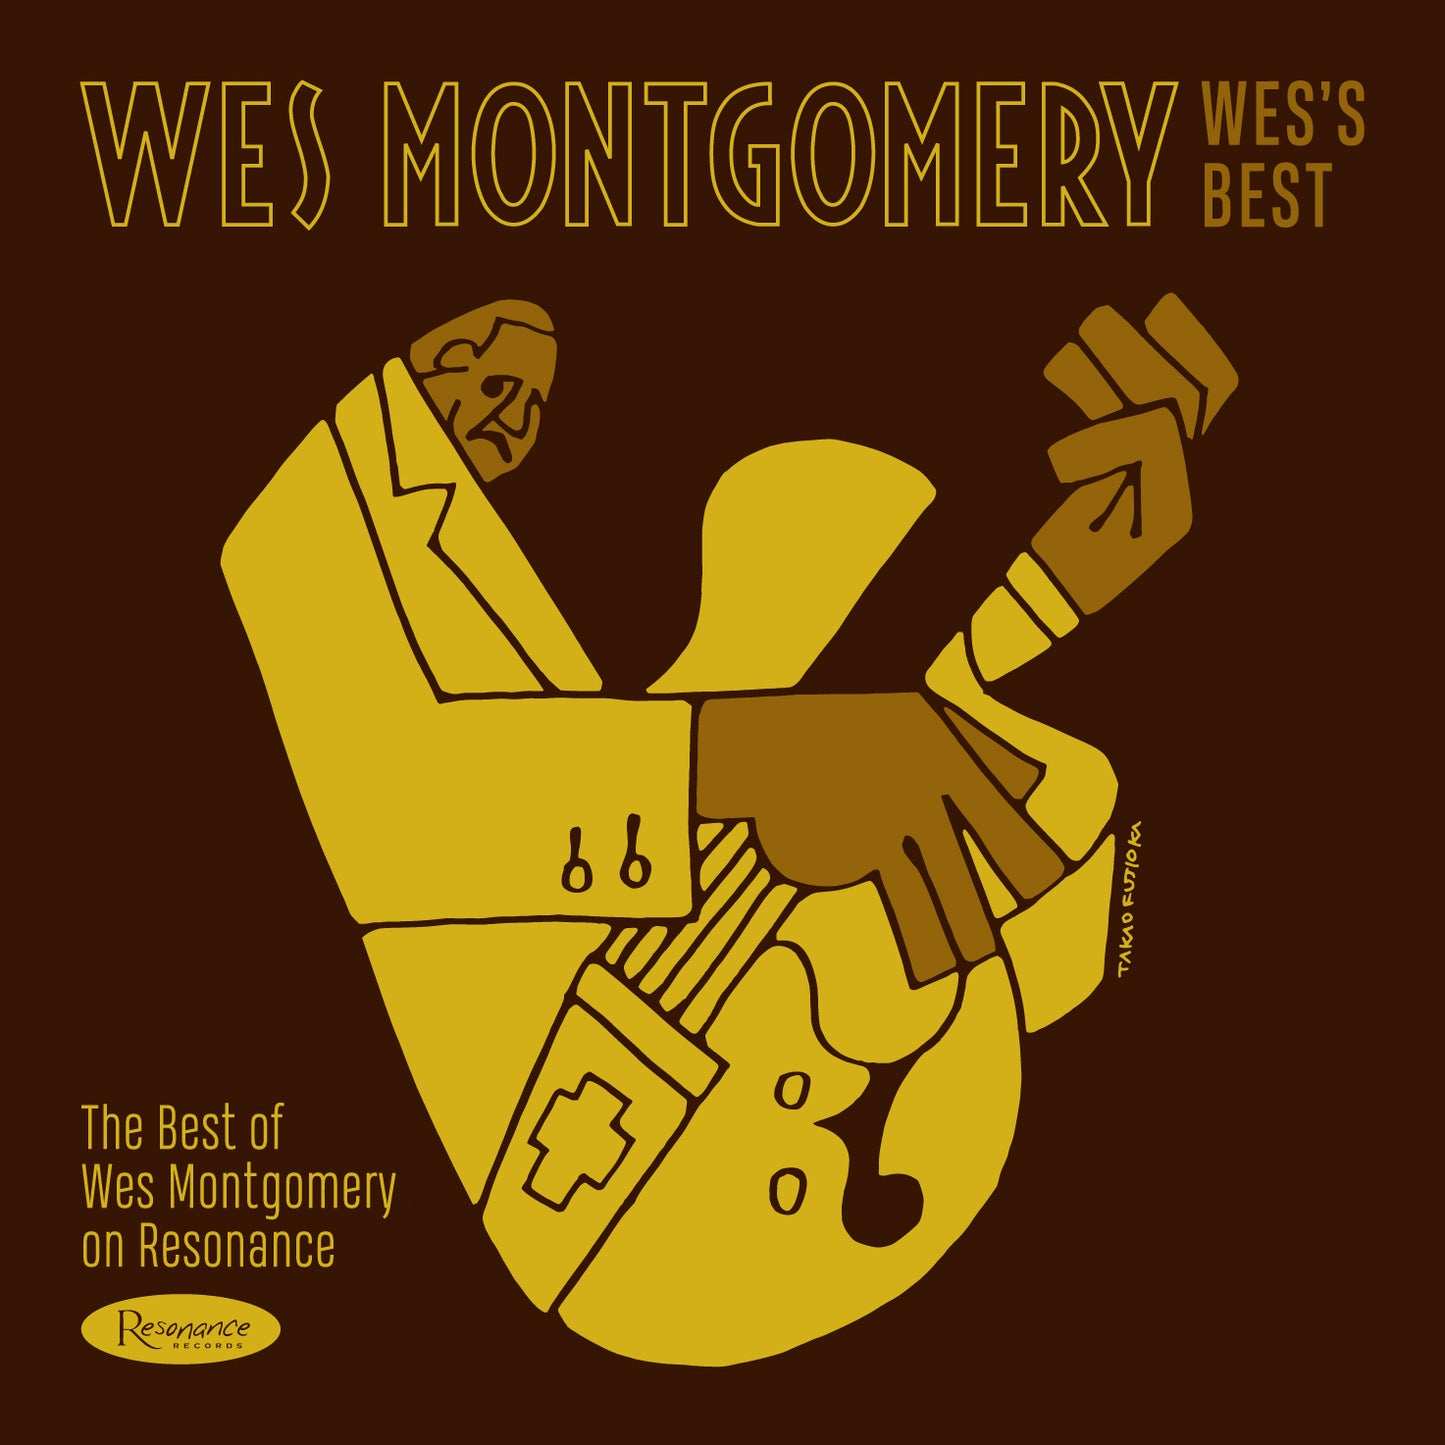 WES MONTGOMERY: Wes's Best: The Best of Wes Montgomery on Resonance